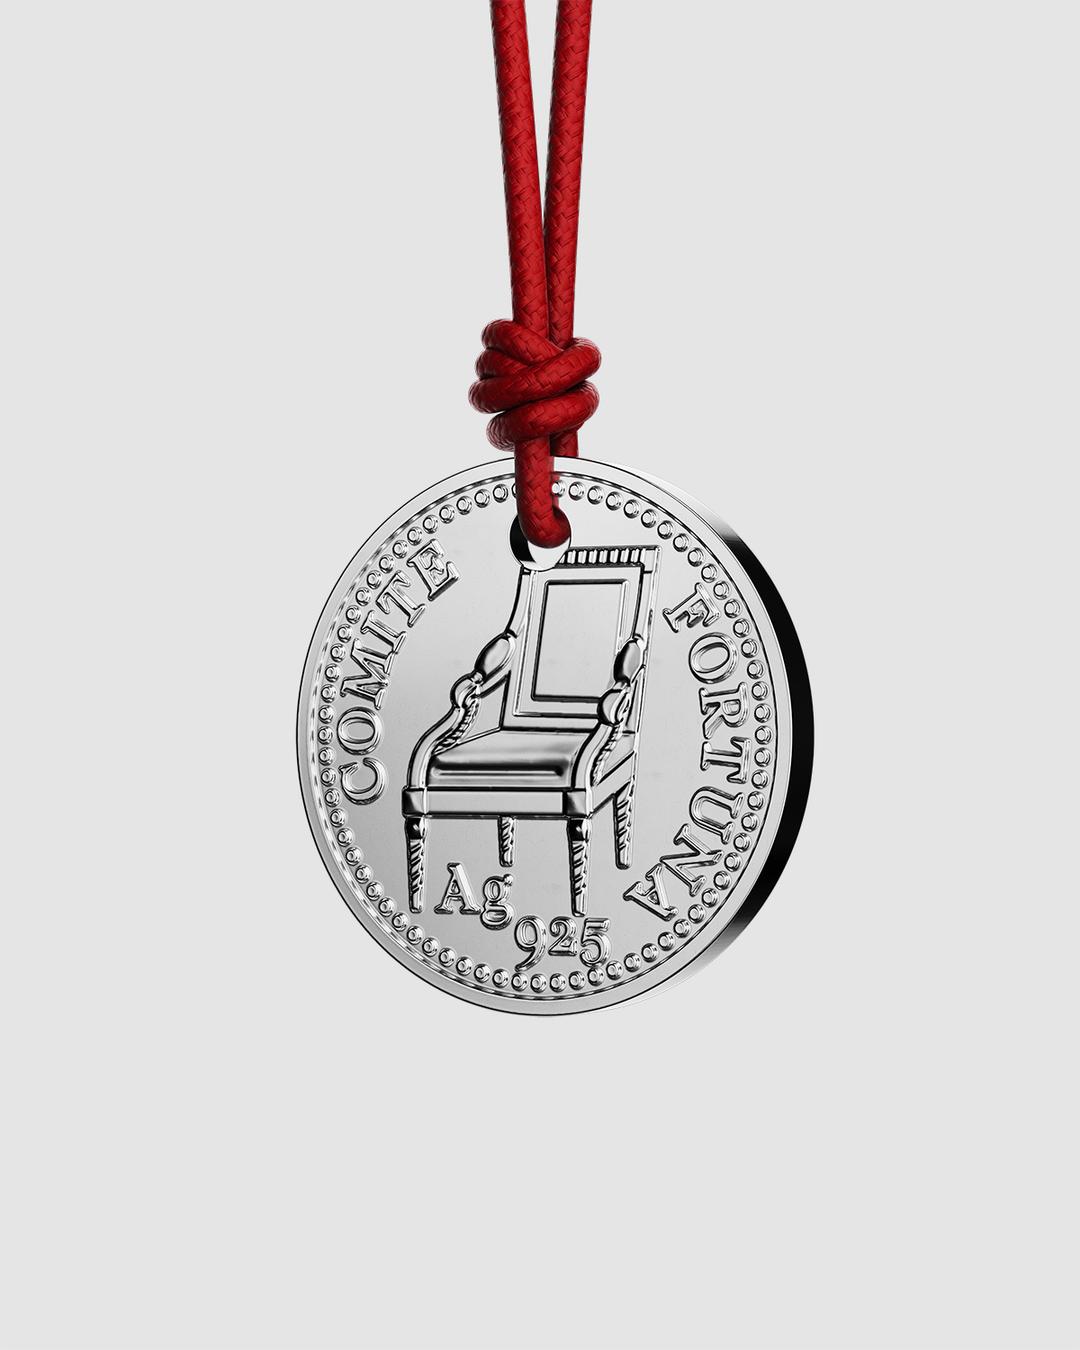 The Chair Coin